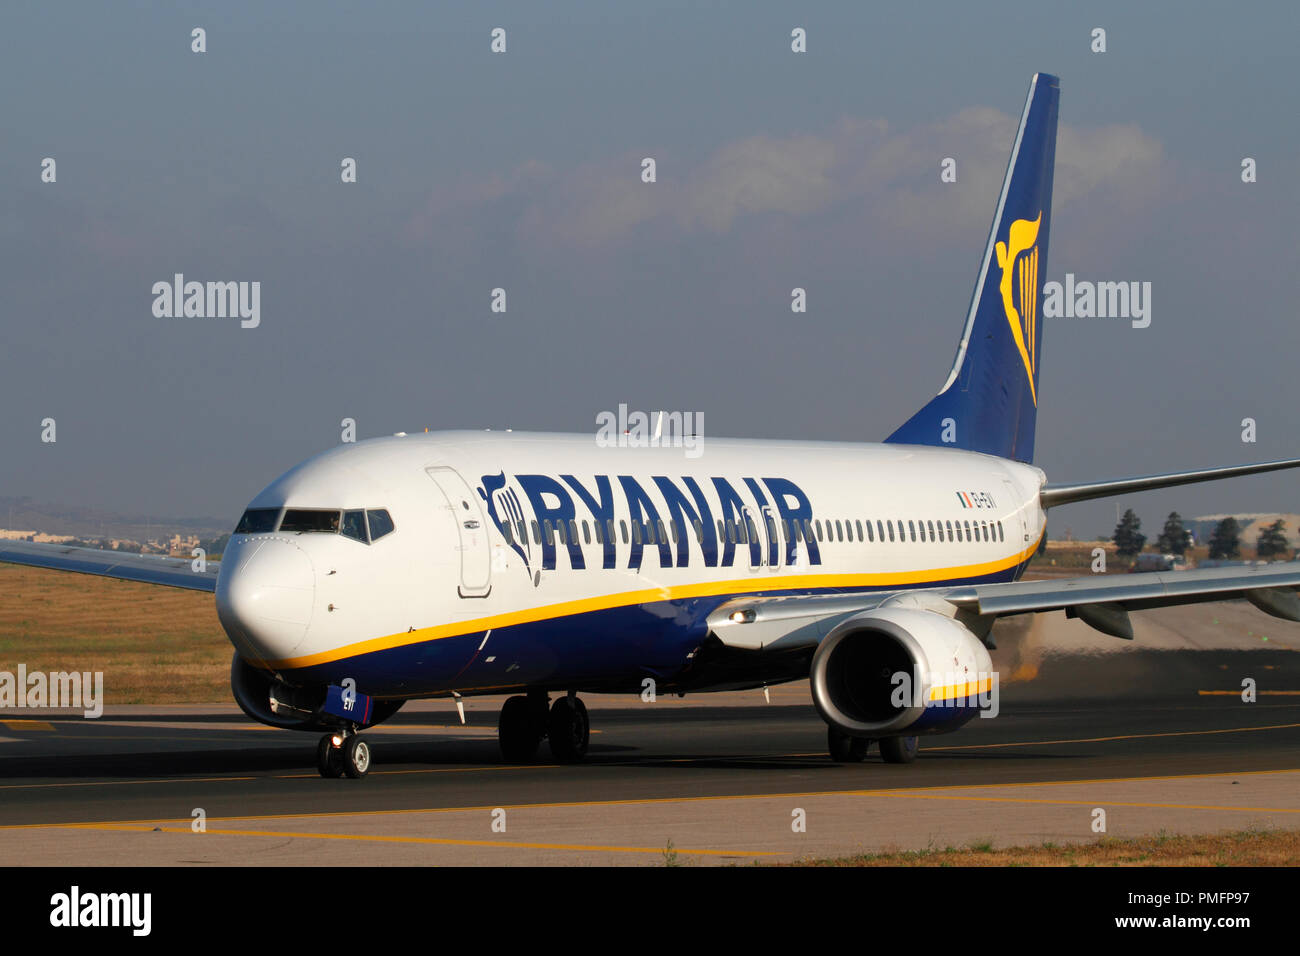 Boeing 737-800 passenger jet plane belonging to budget airline Ryanair taxiing for departure from Malta. Low cost flights and mass tourism. Stock Photo